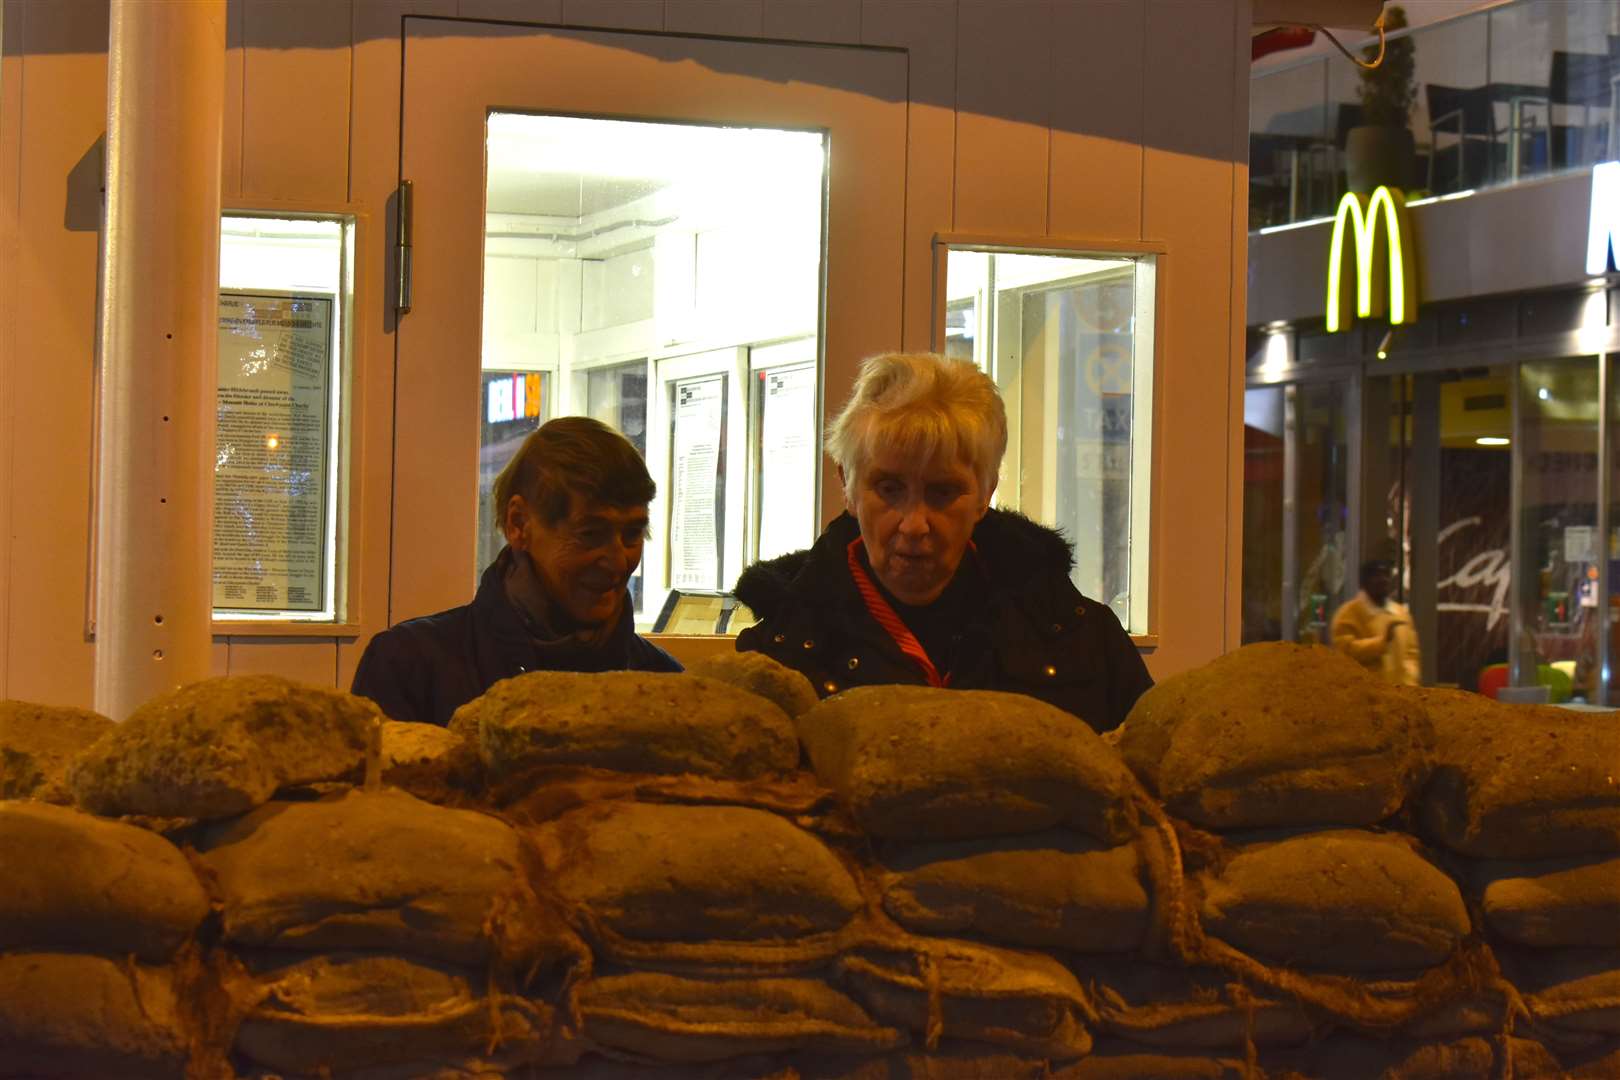 Valerie Crombie and Jenna Park revisit Checkpoint Charlie 60 years on.